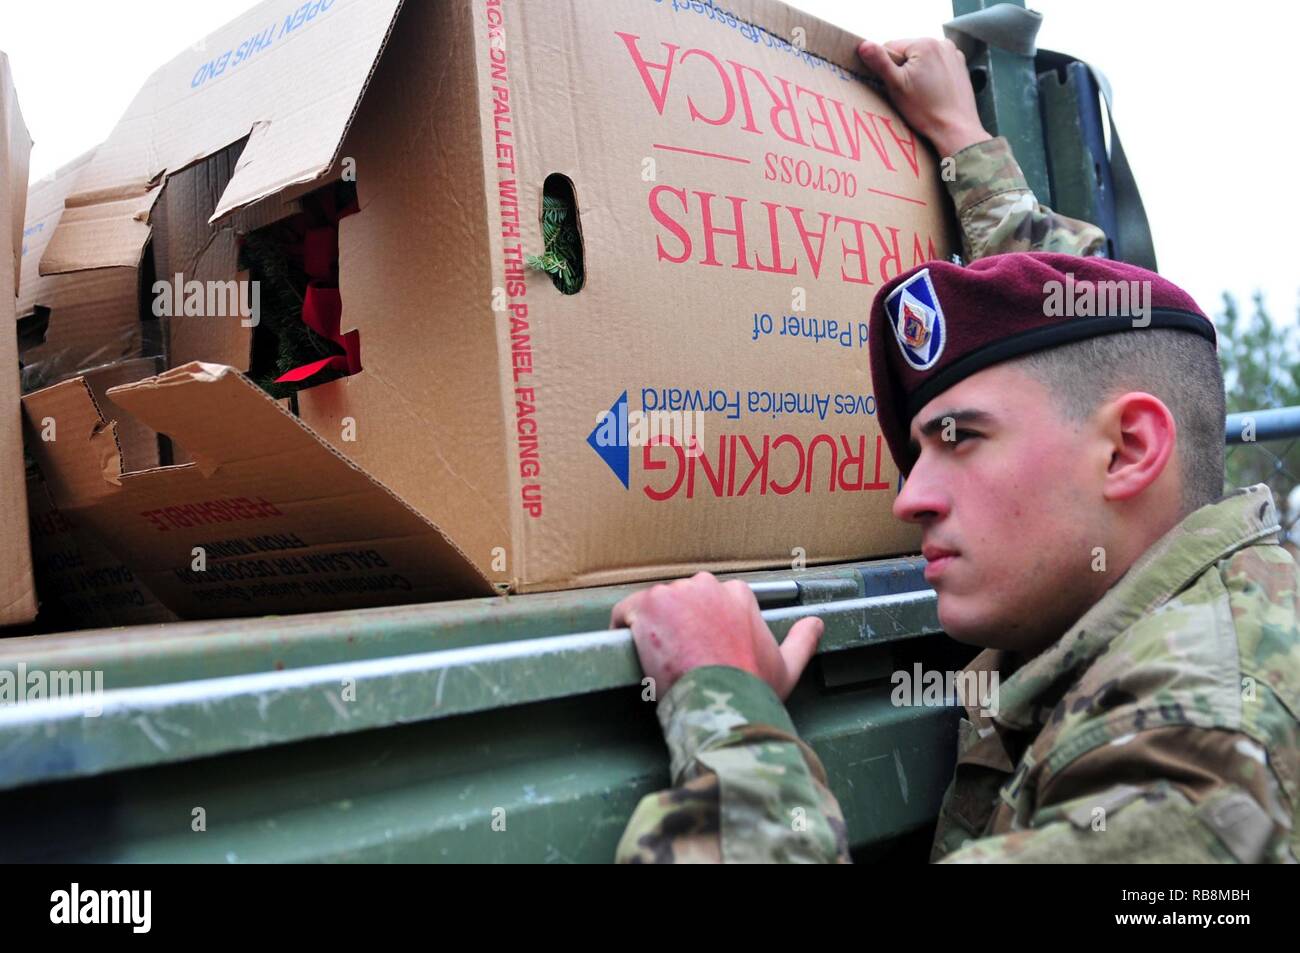 Pfc. Christopher Longoria, a Soldier assigned to XVIII Airborne Corps’ Headquarters and Headquarters Battalion, loads boxes of holiday wreaths onto the back of a military cargo truck, near Spring Lake, N.C. Dec. 17, 2016.  The wreaths were delivered to the Sand Hills State Veteran’s Cemetery nearby as part of an event called Wreaths Across America.  According to Senate Resolution 726 of the 110th U.S. Congress, the annual event “recognizes the sacrifices our veterans, service members and their families have made, and continue to make, for our great Nation.” Stock Photo